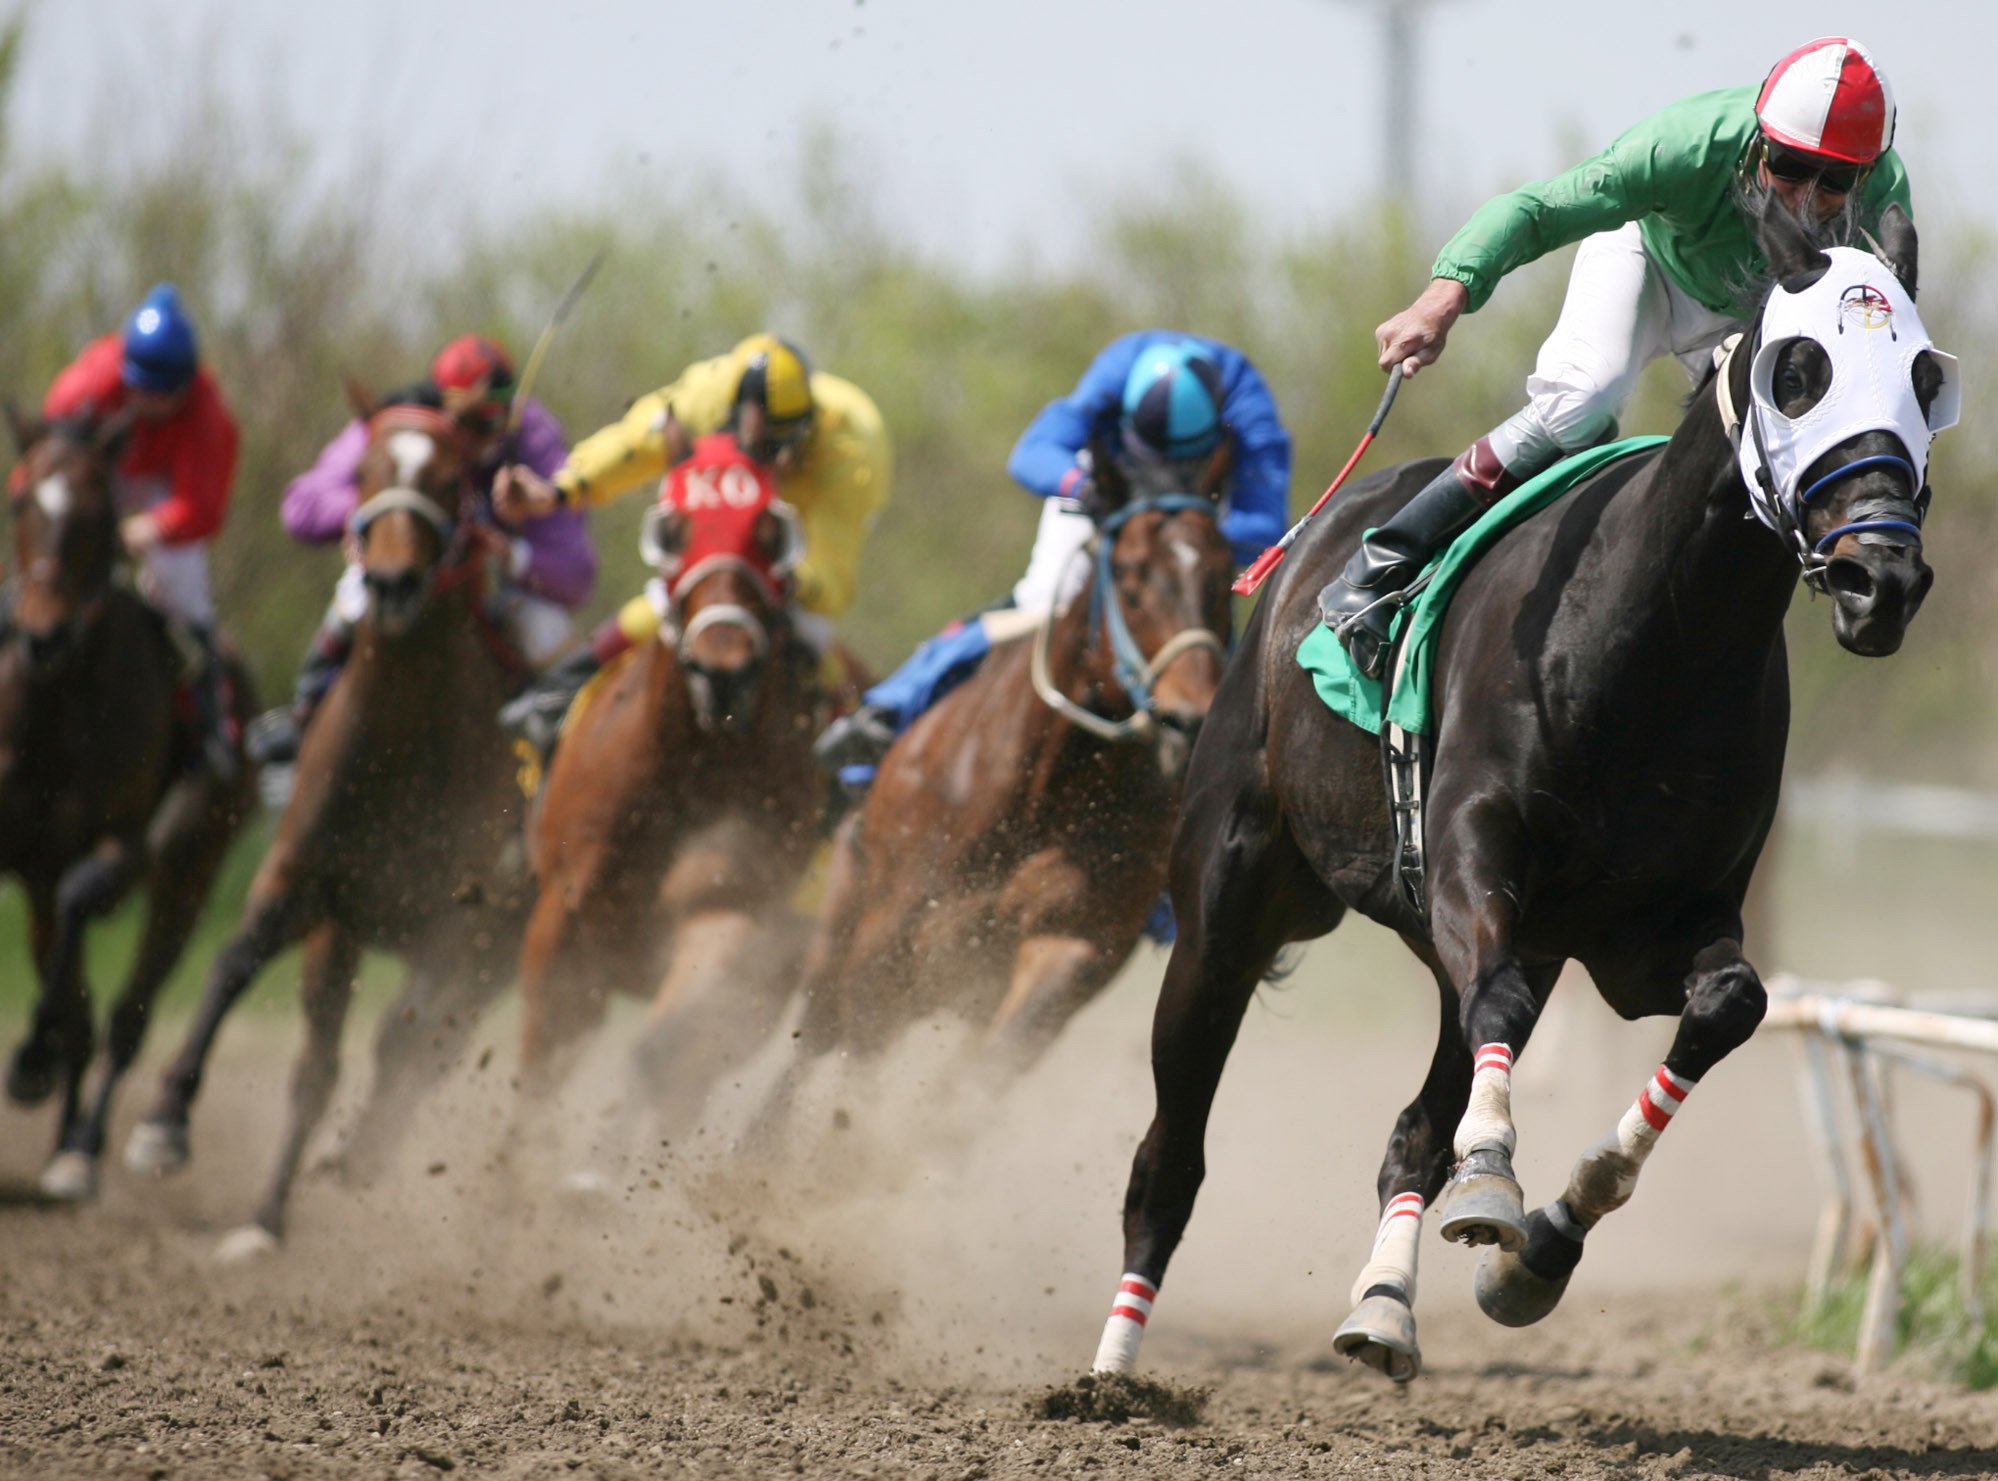 Horse race wallpapers and images   wallpapers pictures photos 1998x1481